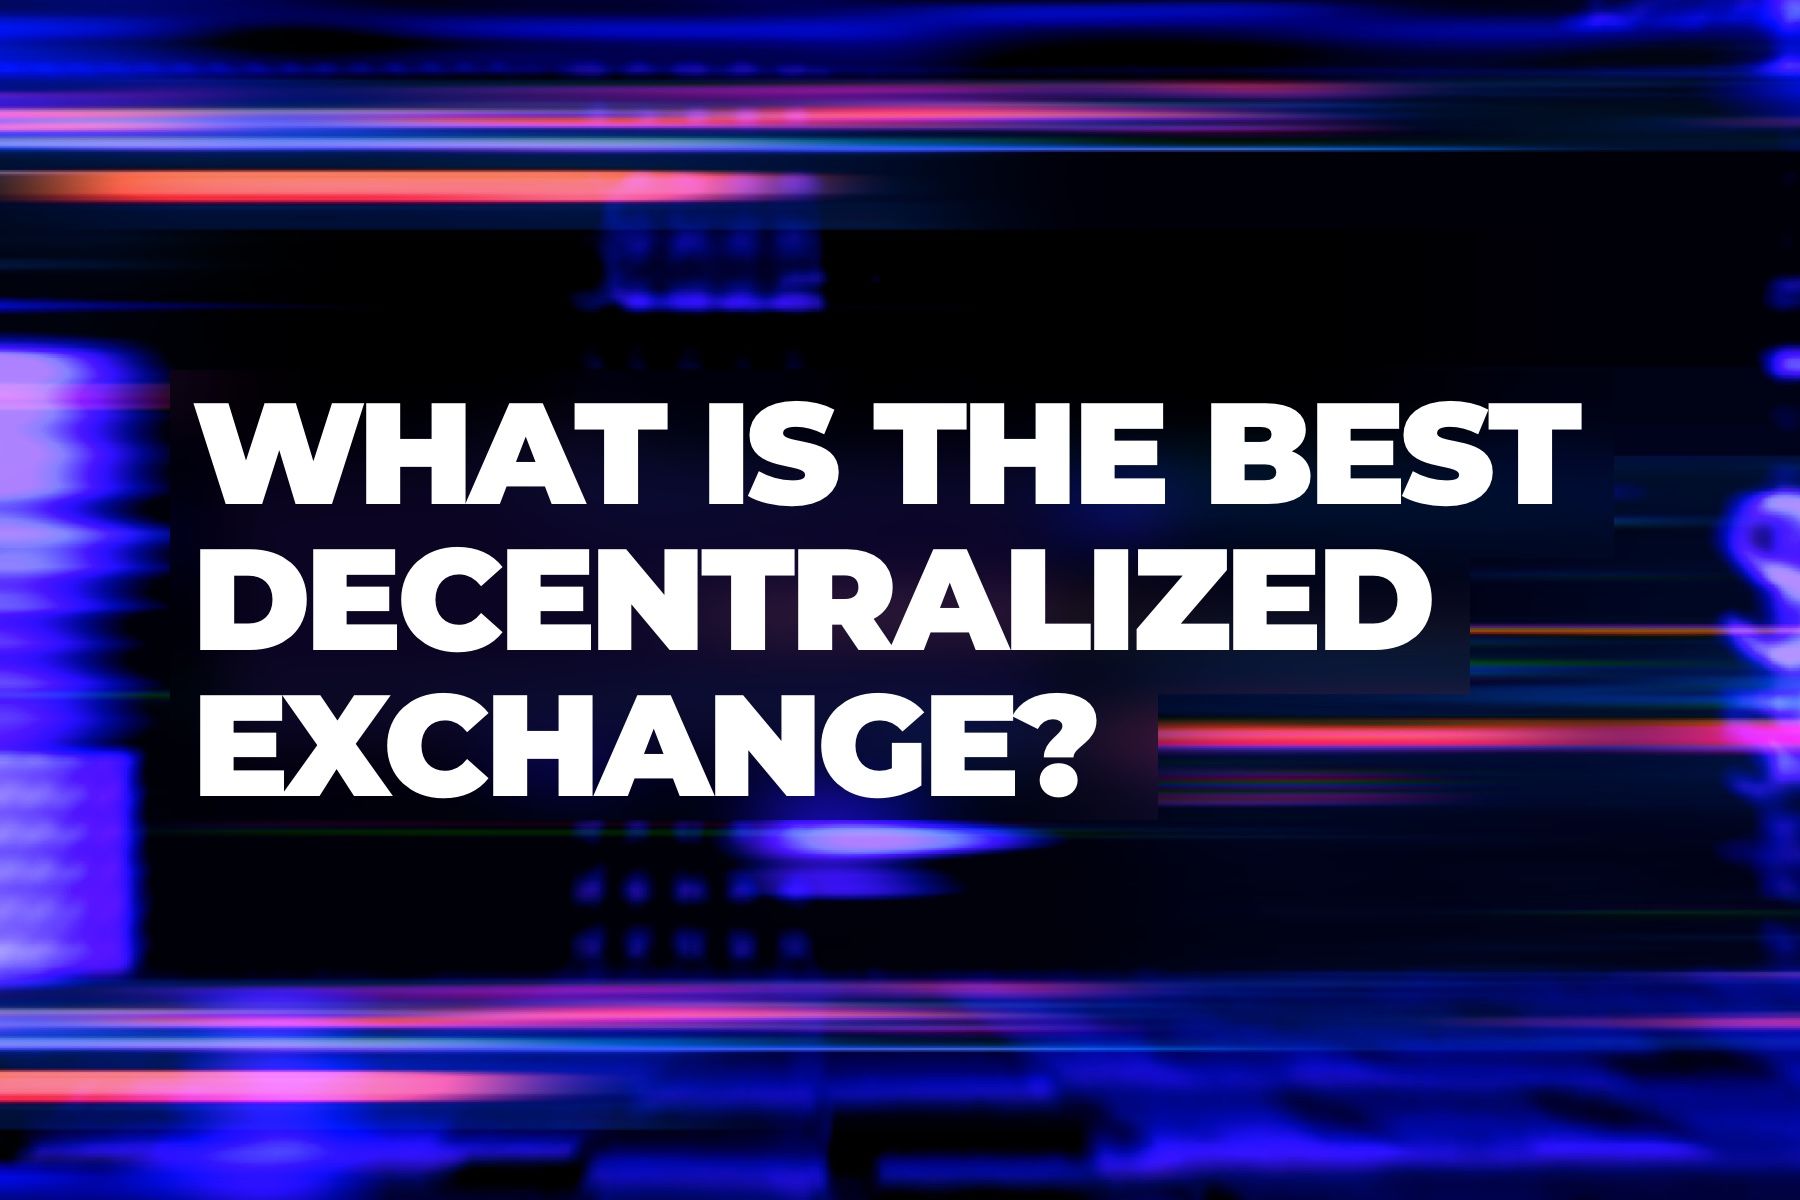 What Is The Best Decentralized Exchange in 2019?